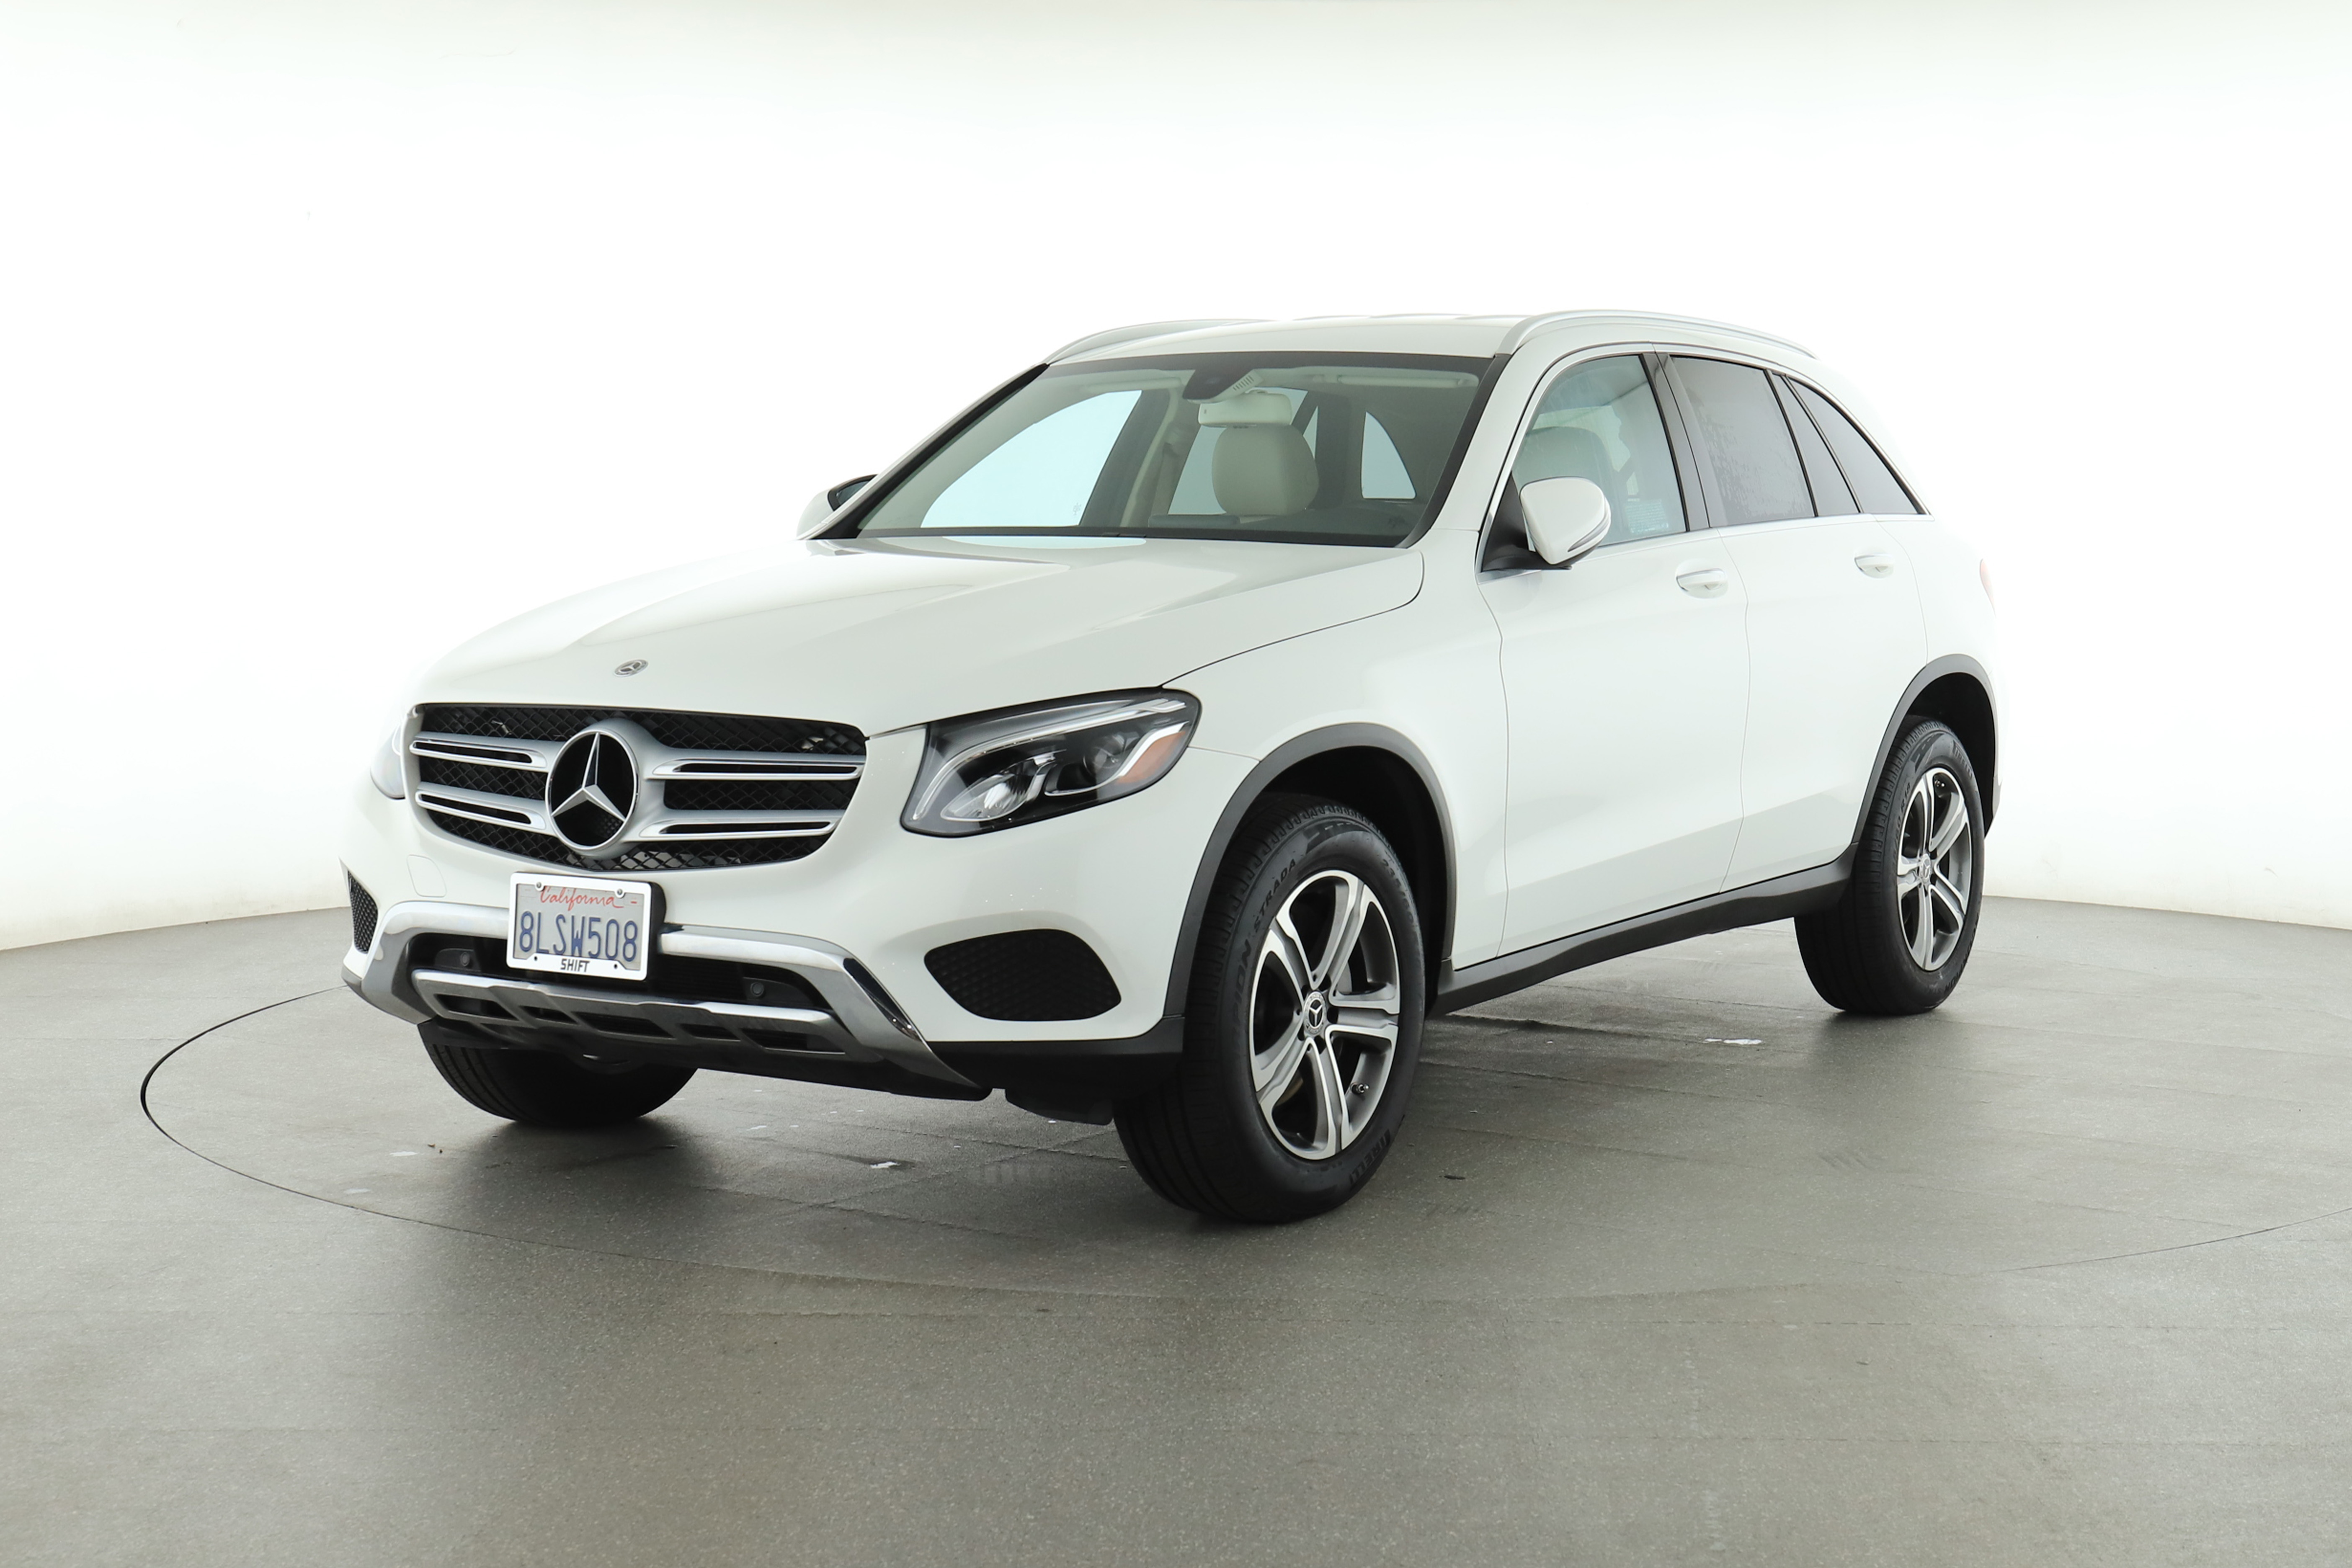 Used 2019 White Mercedes-Benz GLC 300 for $26,450